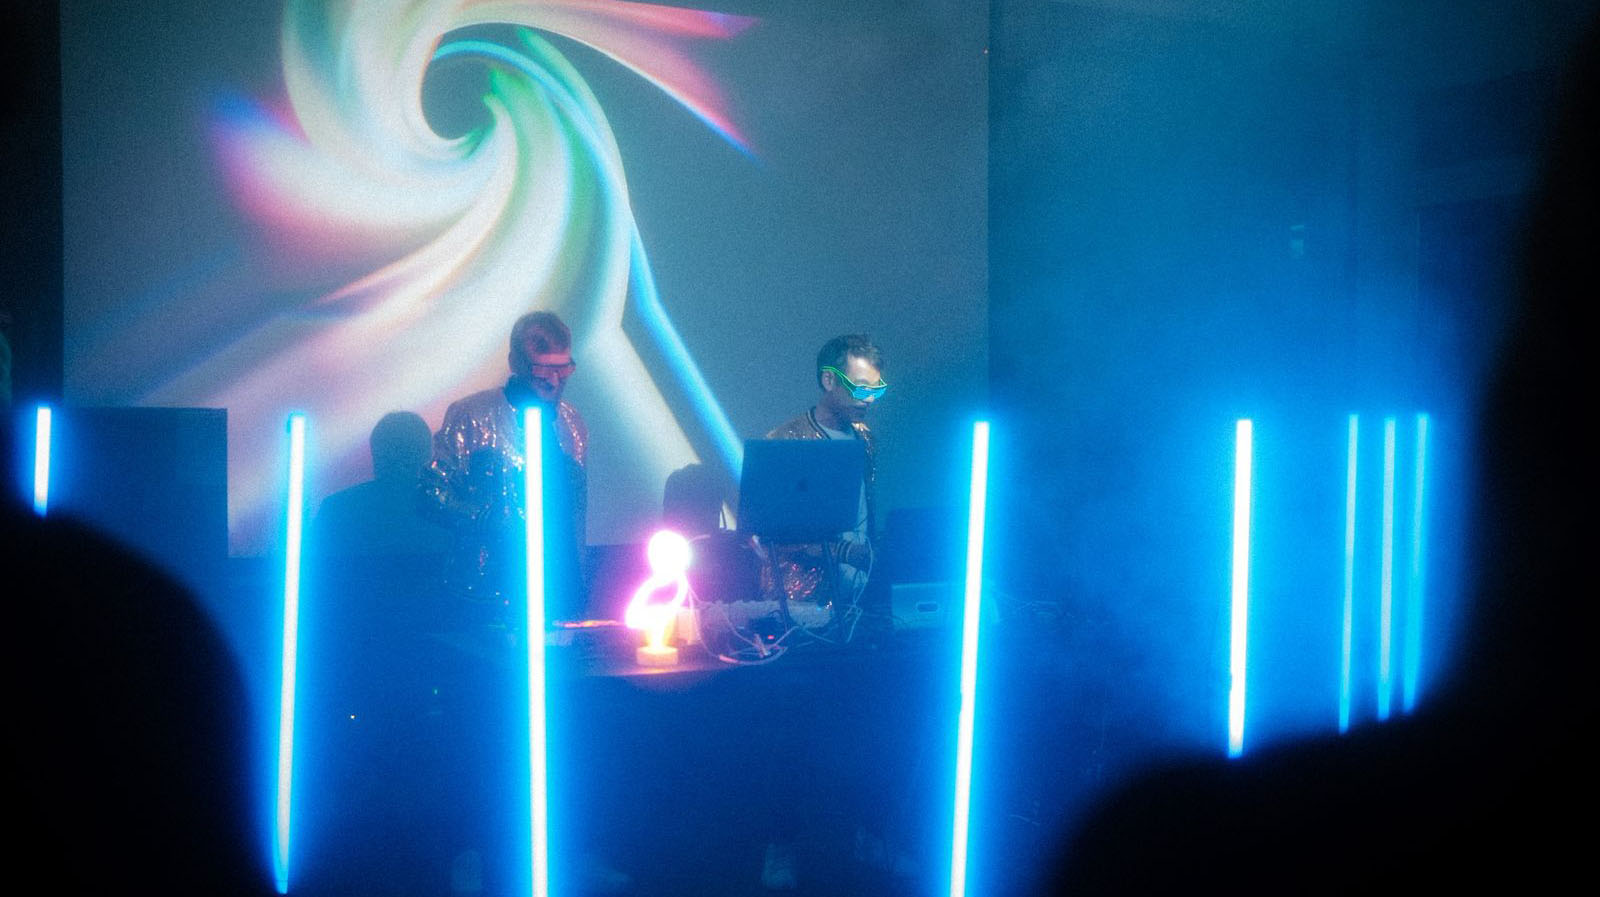 2 musicians playing music in front of a LED wall